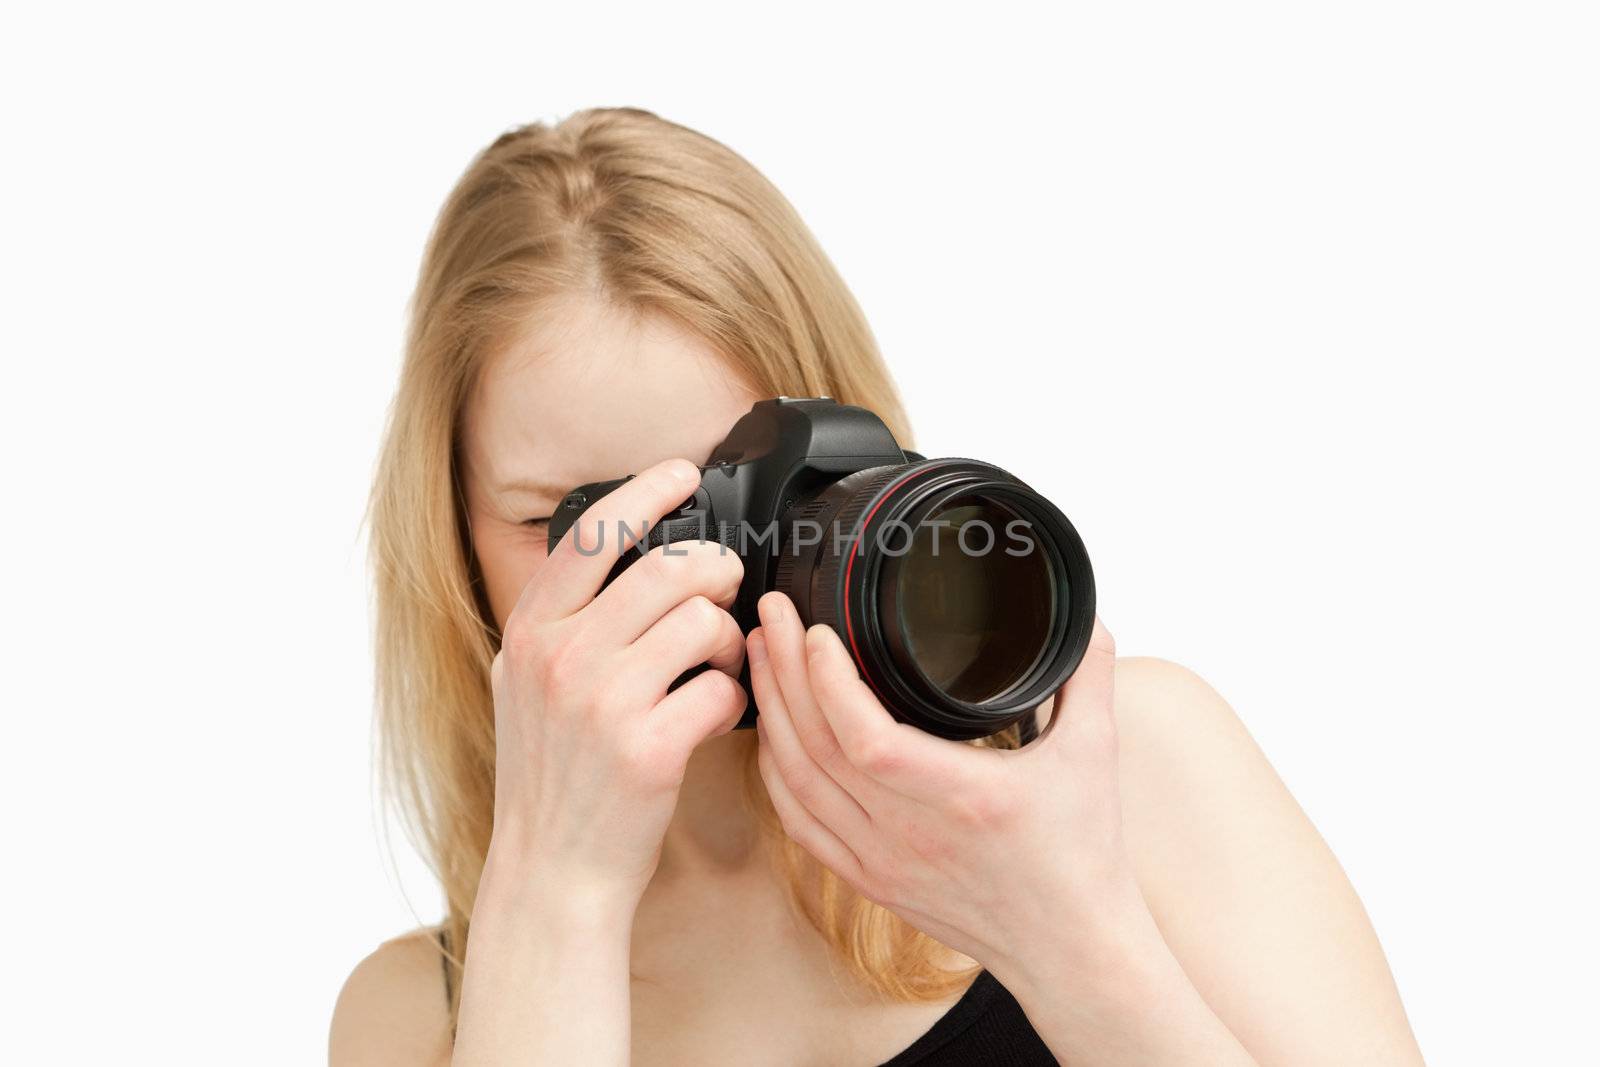 Woman taking a photography with a single-lens reflex camera against white background